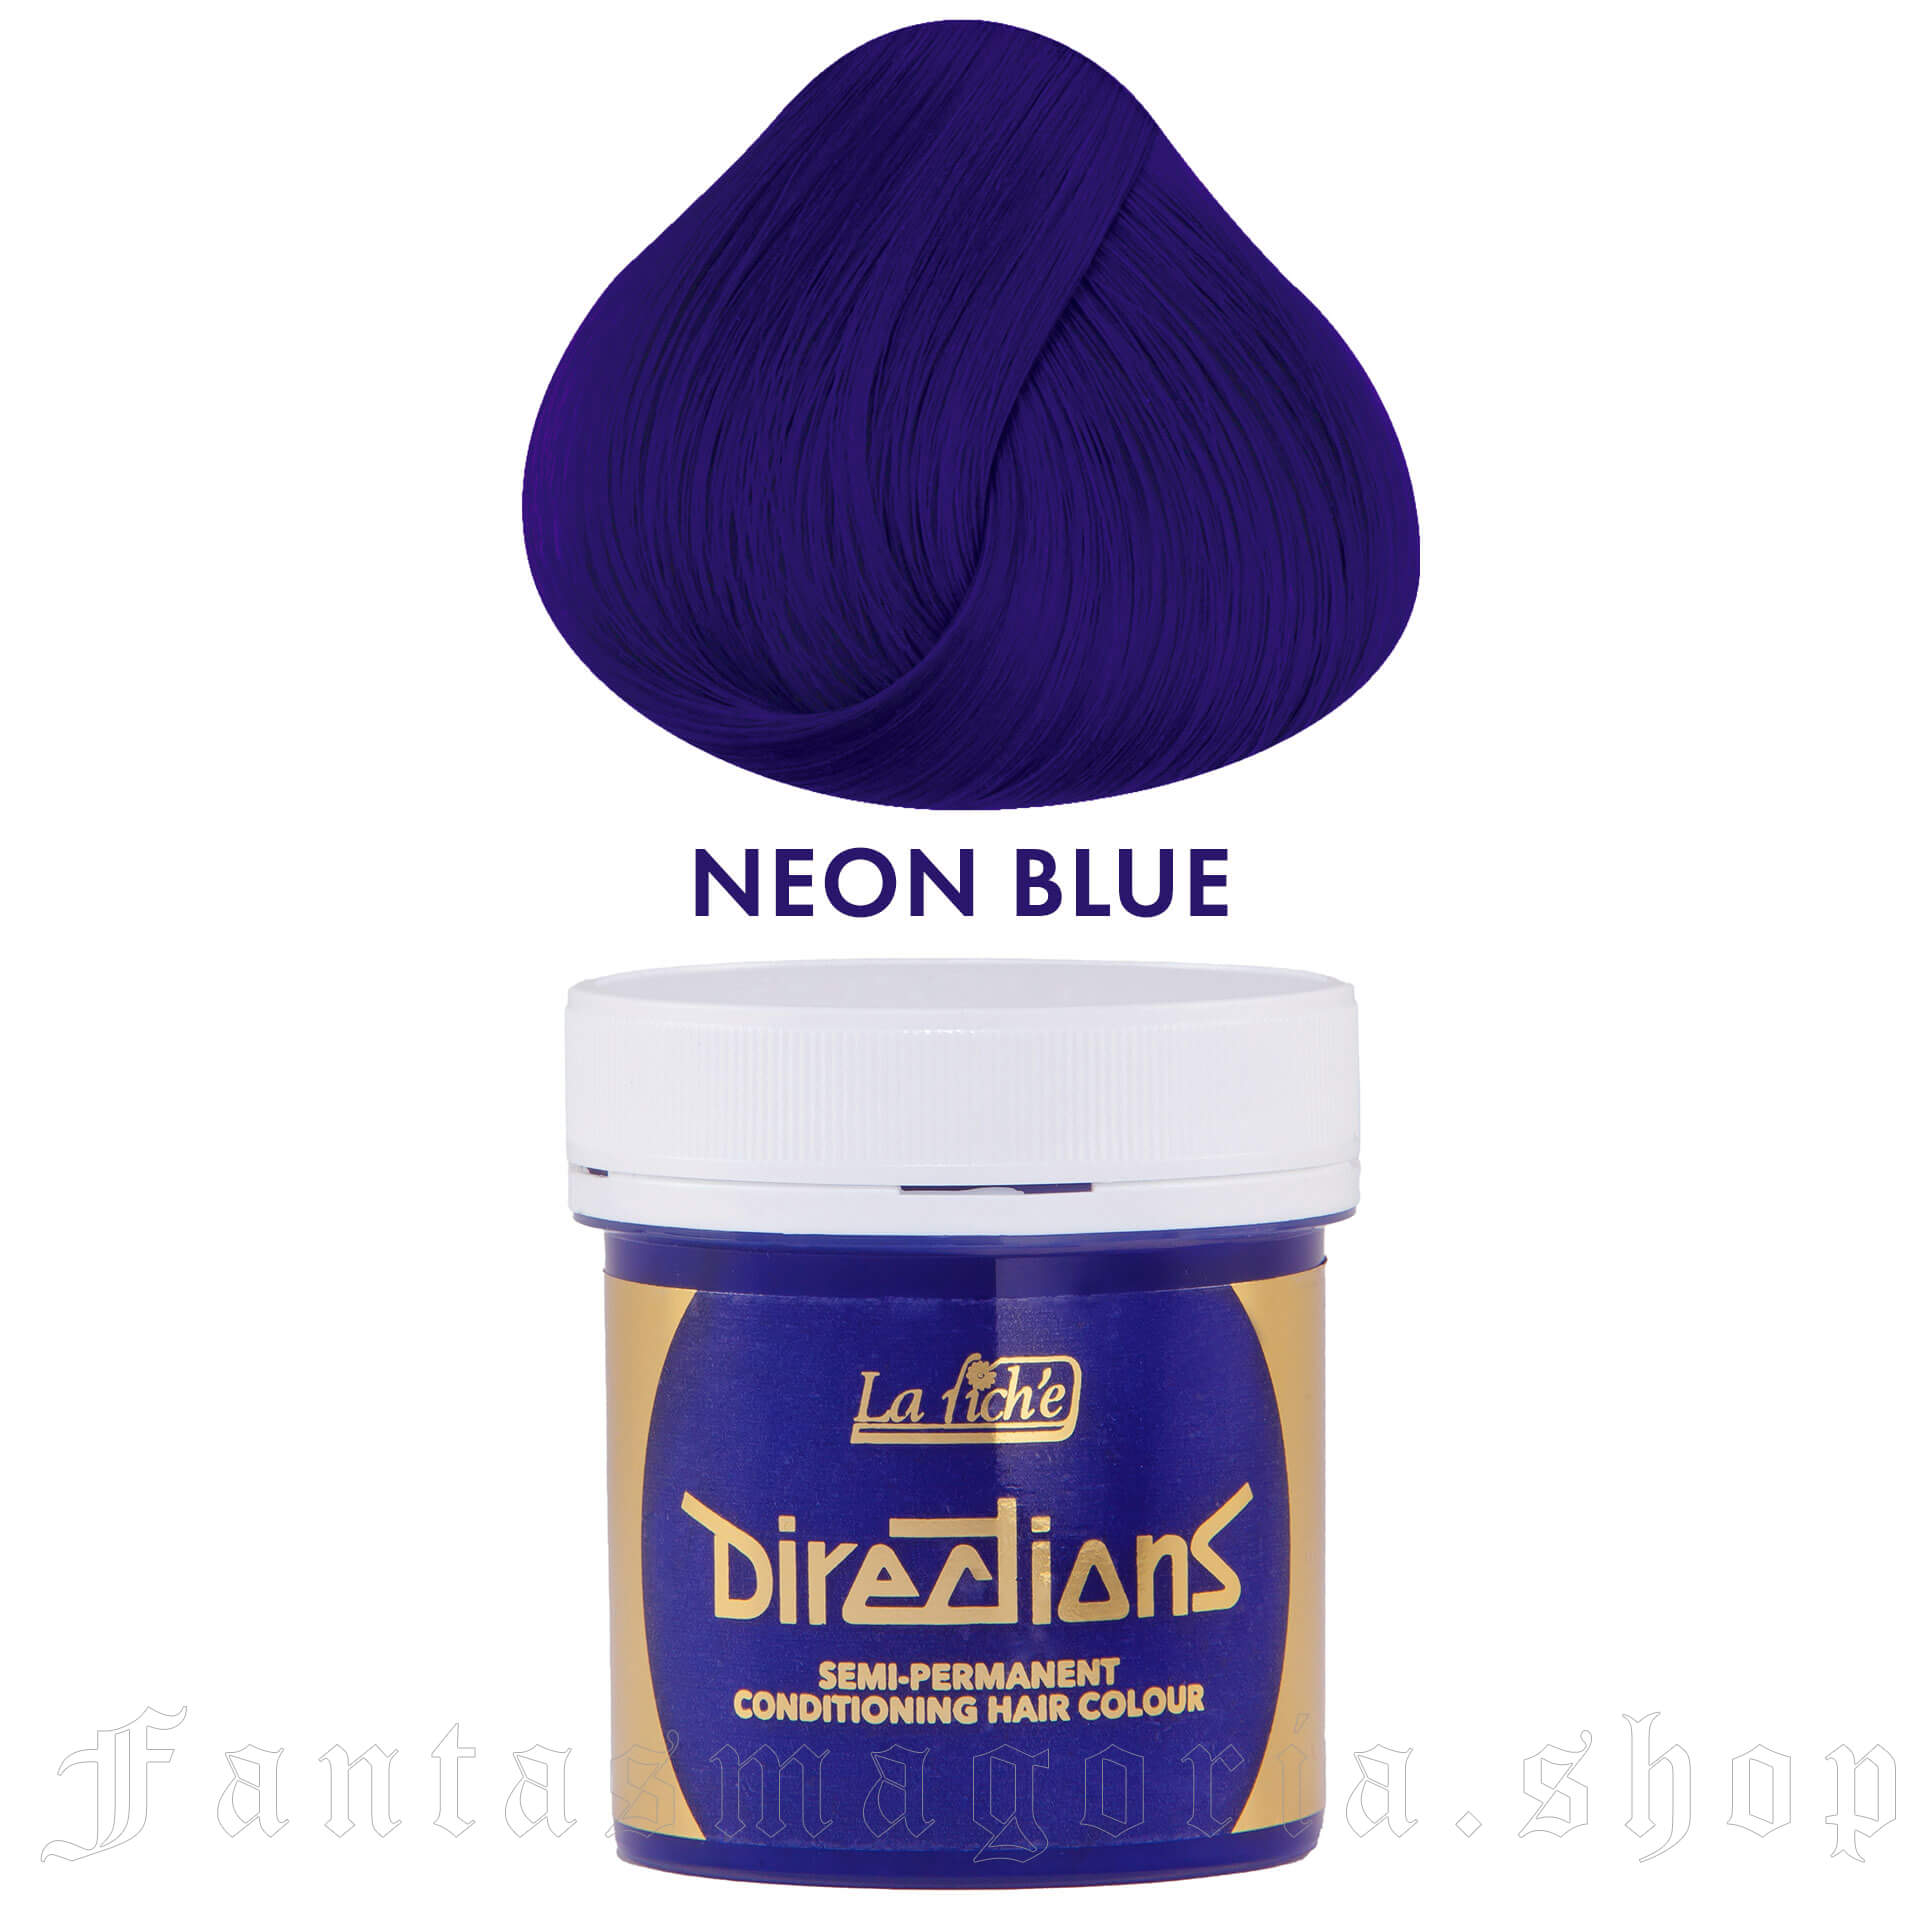 Neon Blue Hair Coloring Balsam - Directions - DIRECTIONS/NEON-BLUE 1